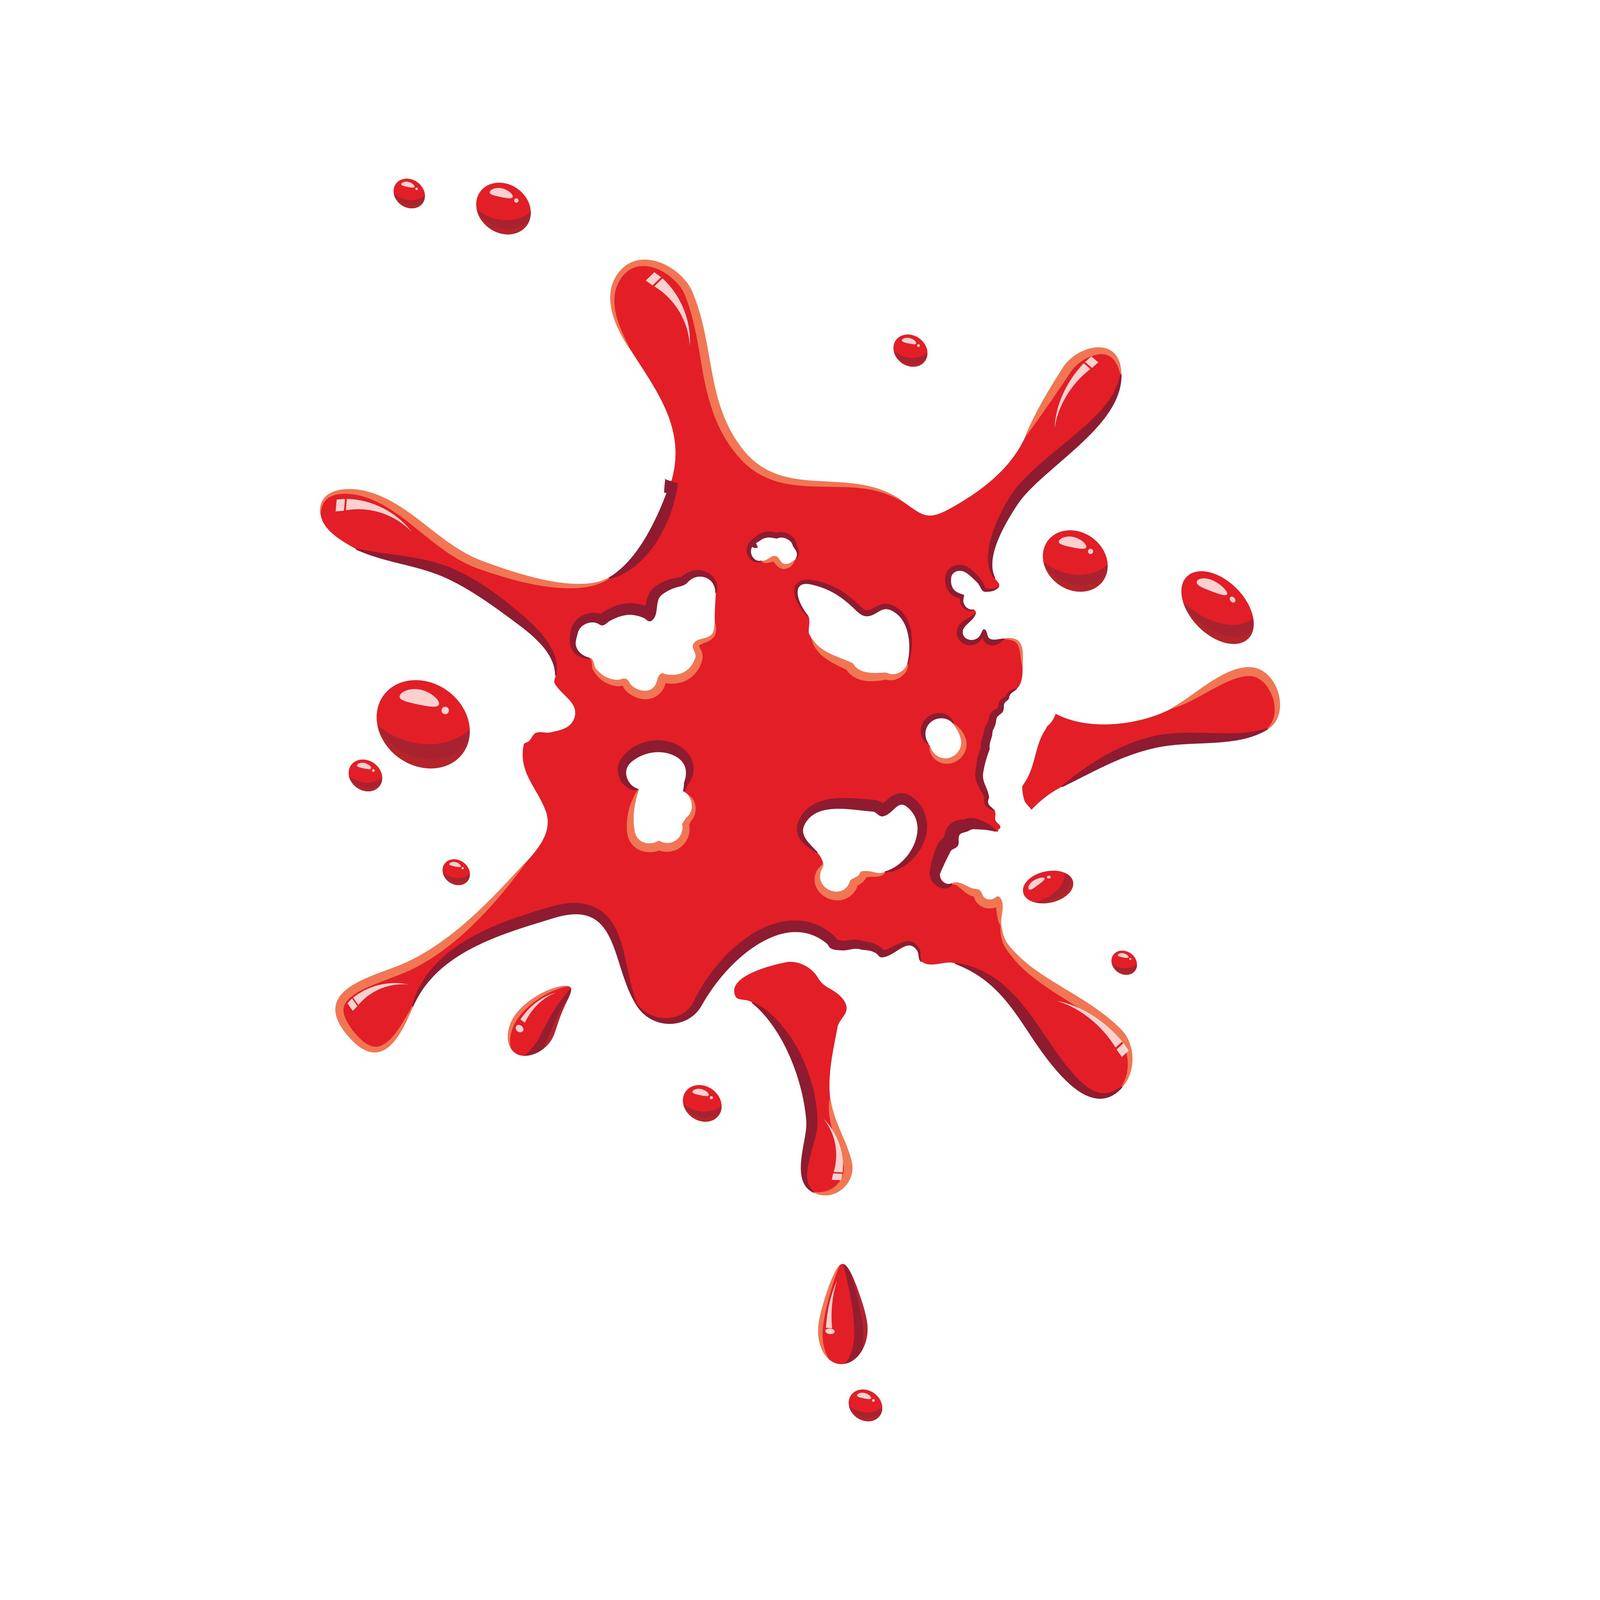 Small spot of blood icon by ylivdesign